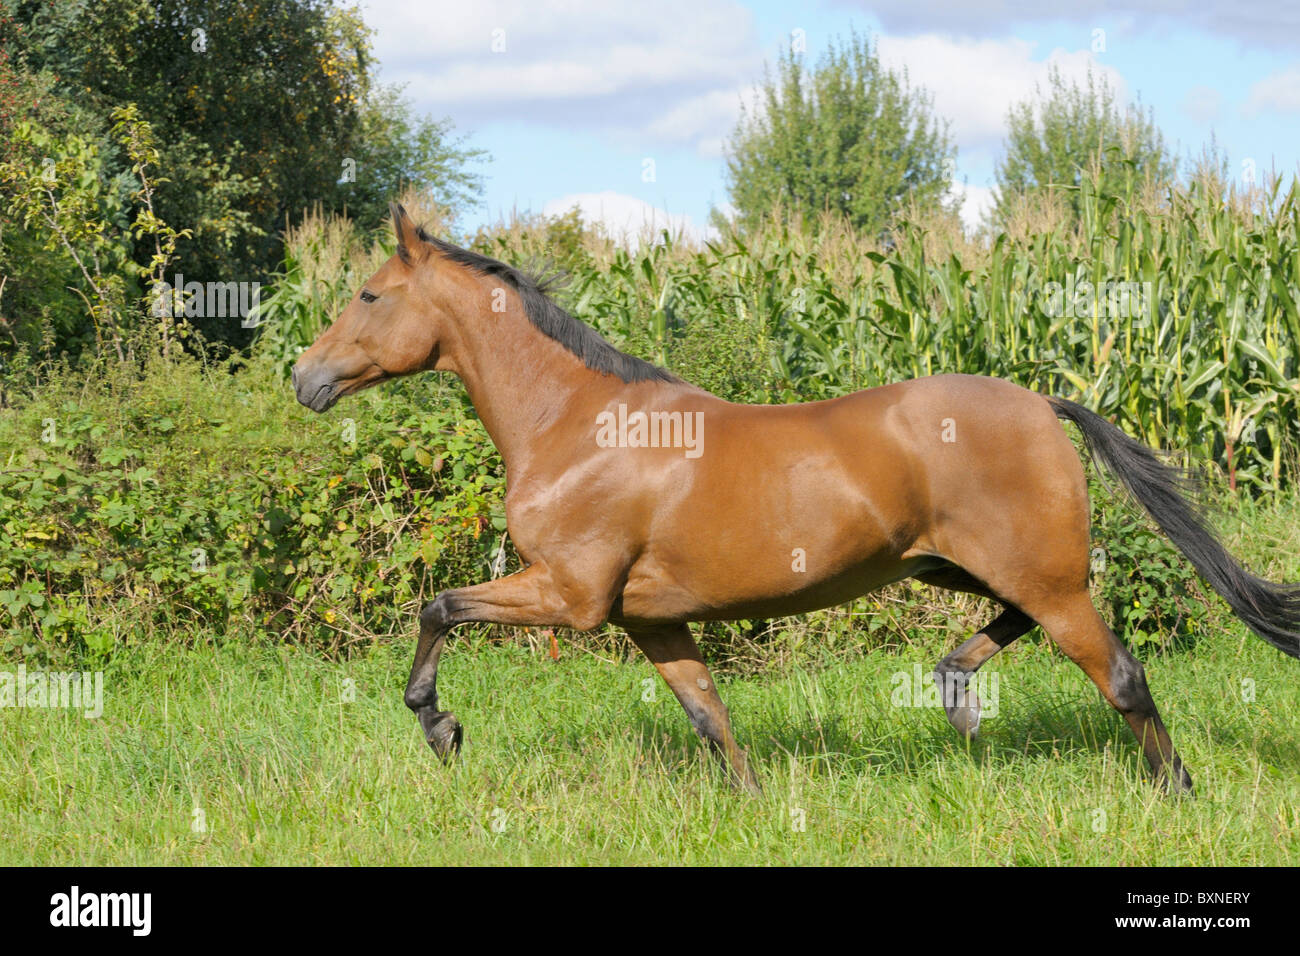 American Standardbred horse trotting in the field Stock Photo